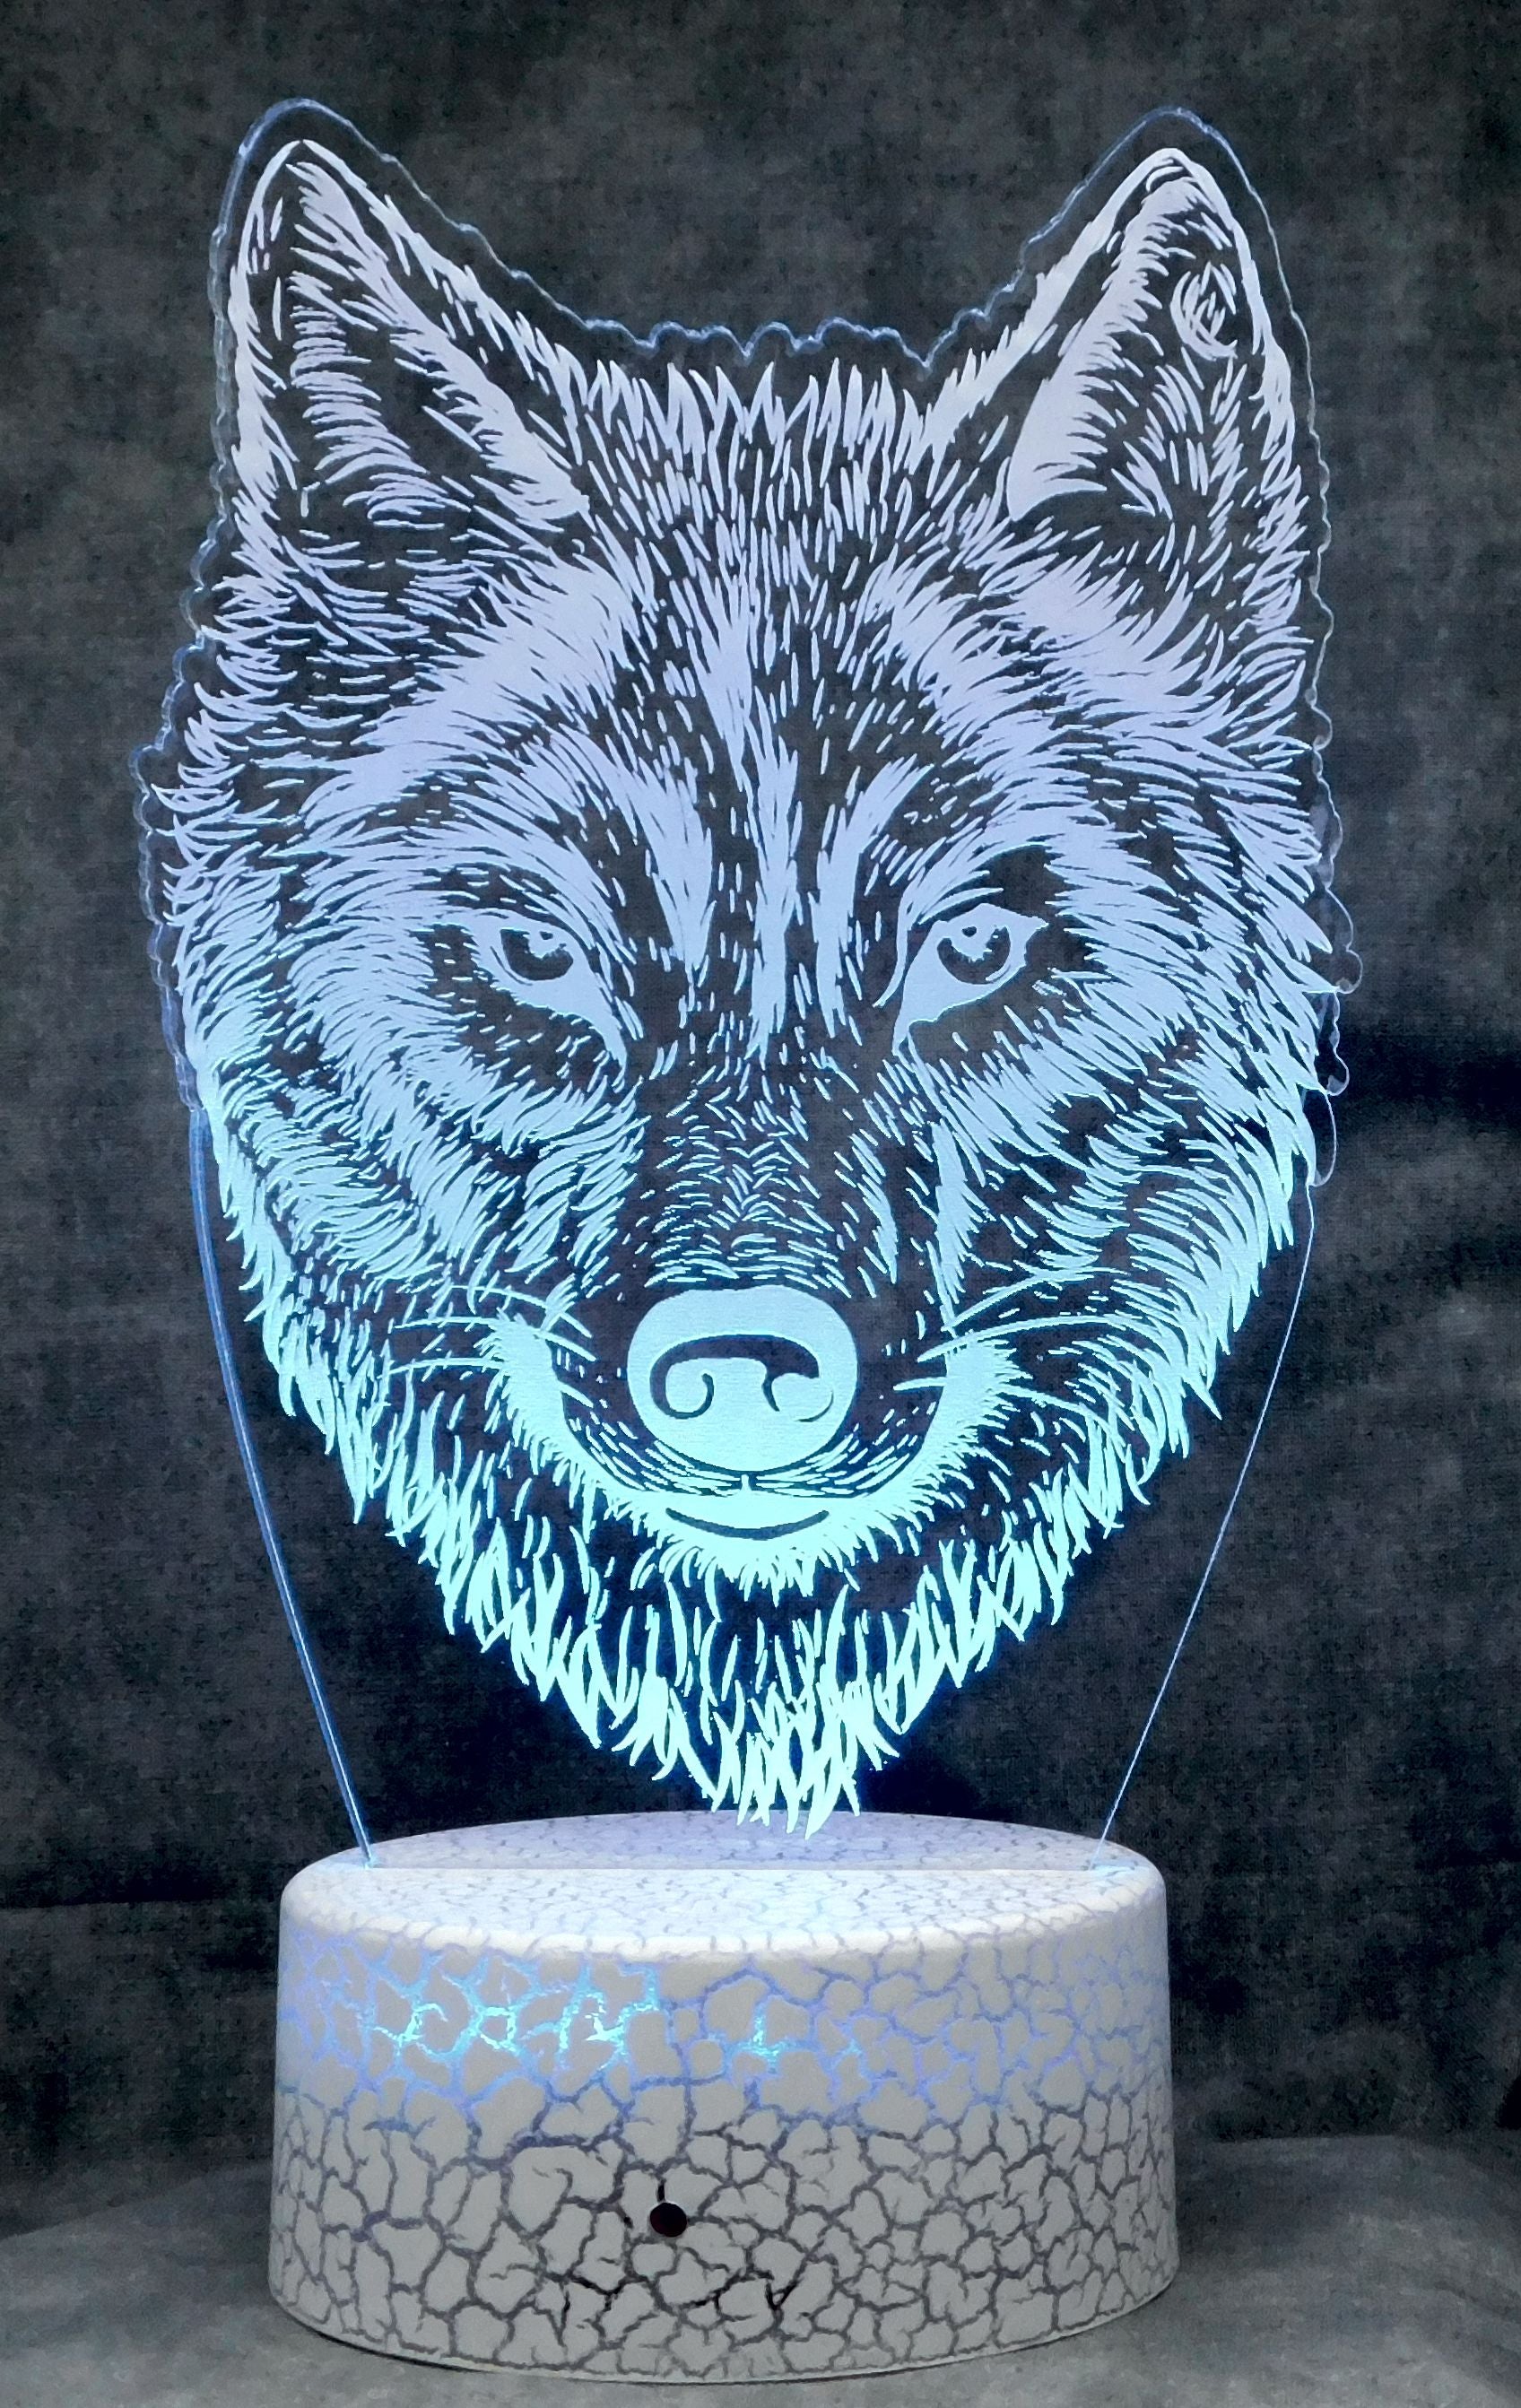 Wolf's Face Image 3-D Optical Illusion Multicolored Lamp